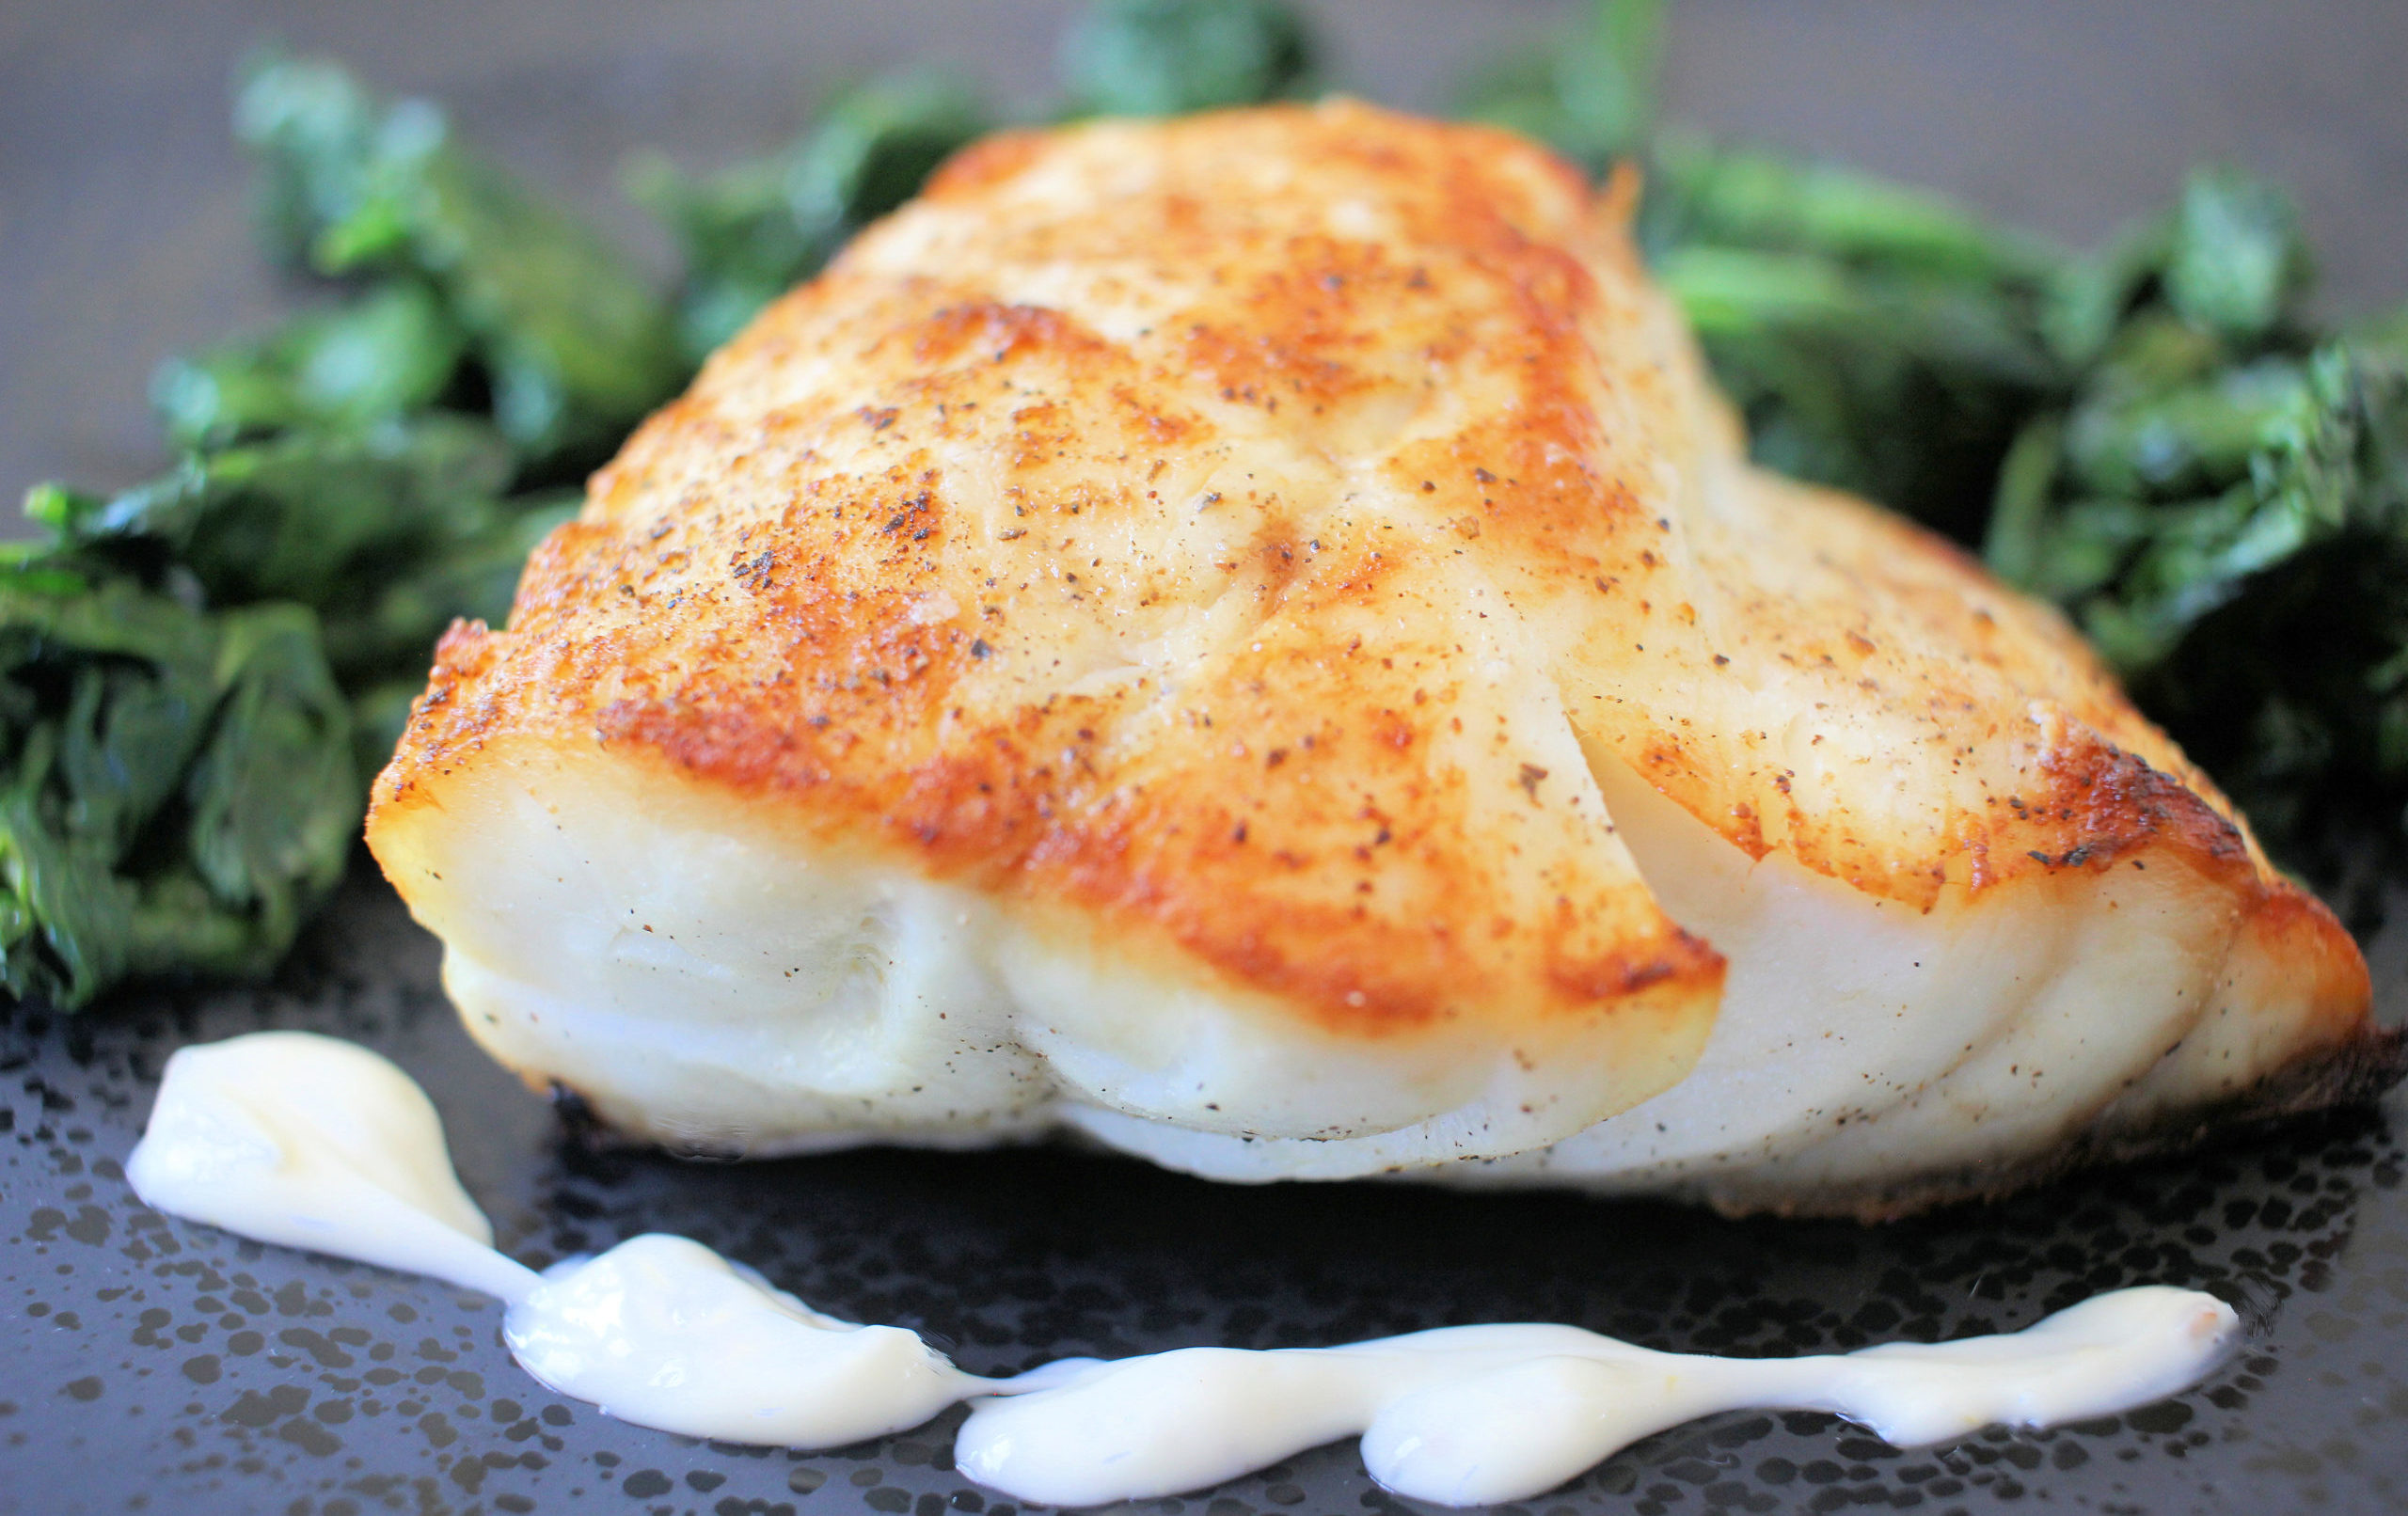 Broiled Grouper with Dijon Mayo